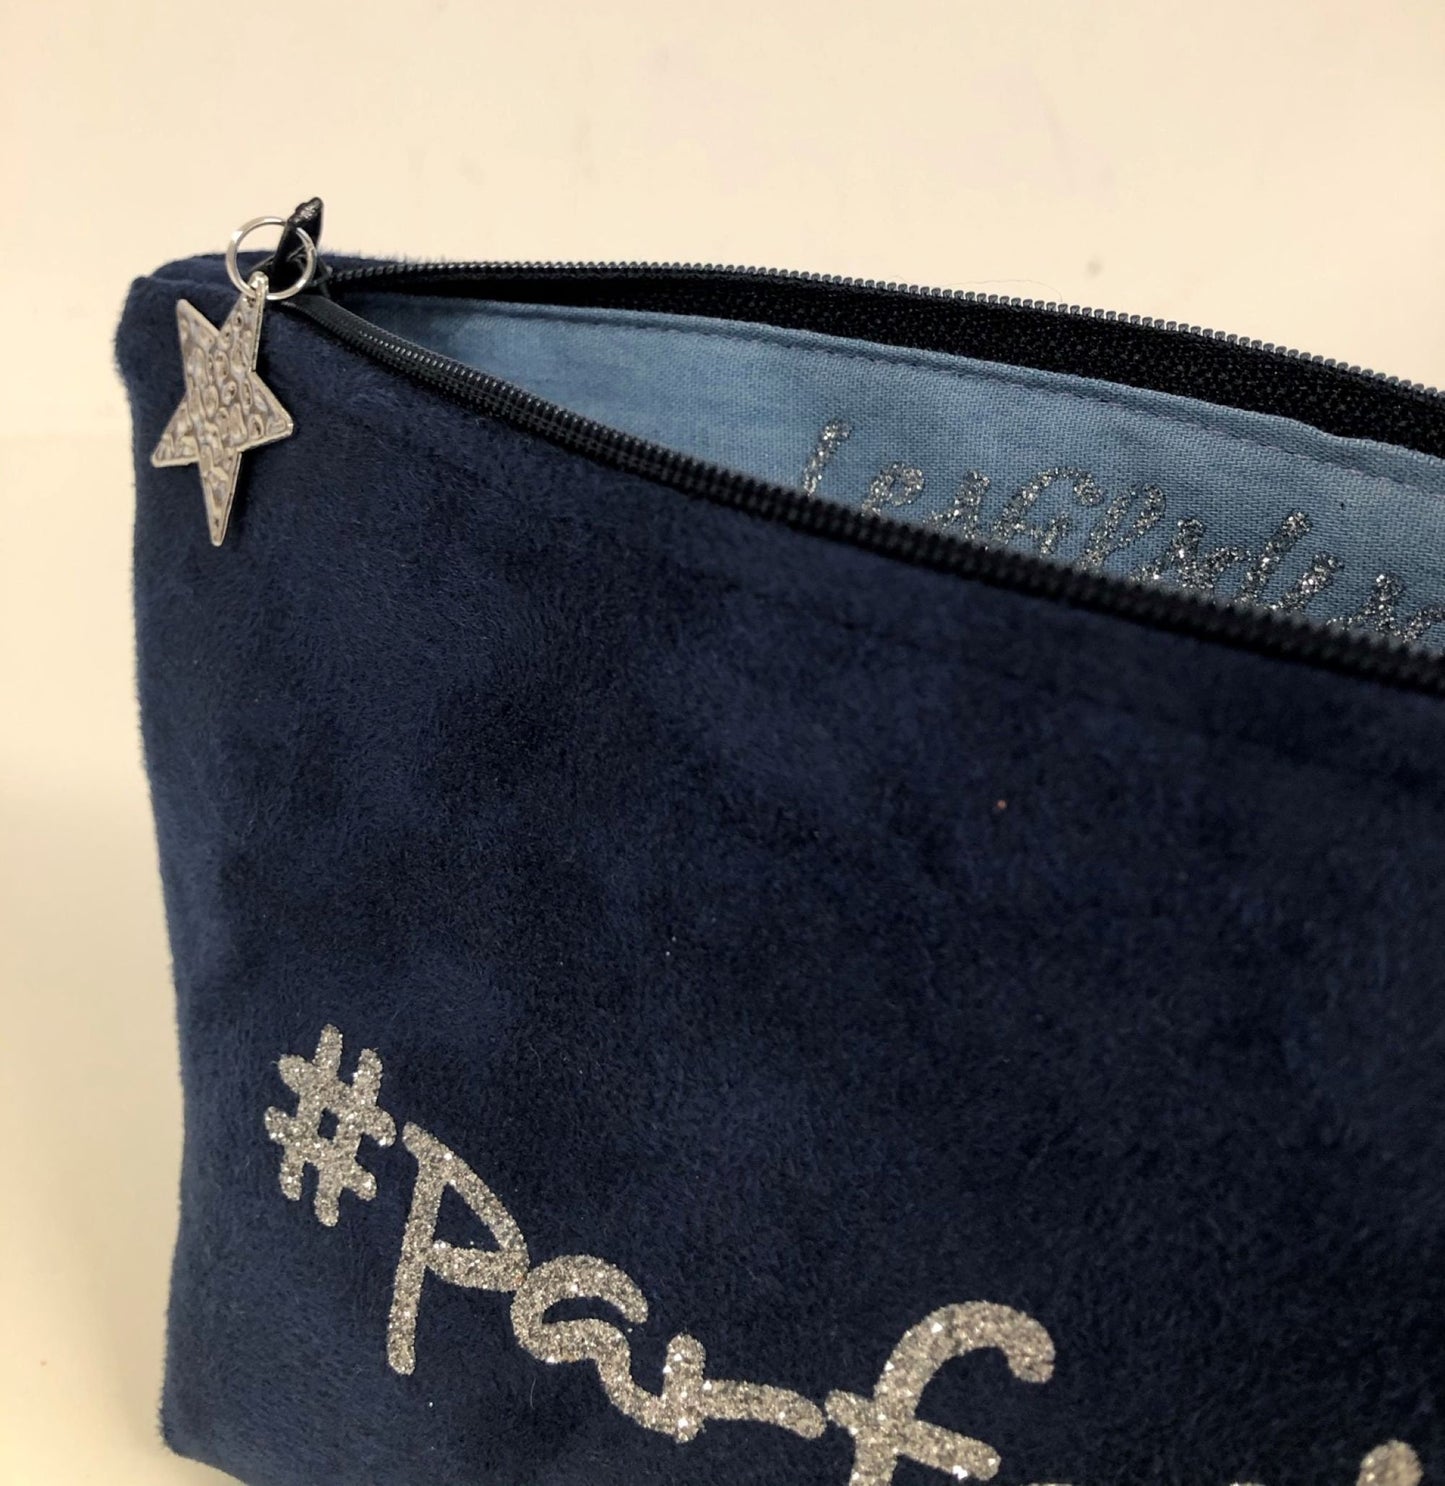 Perfecte navy blue makeup bag with silver sequins